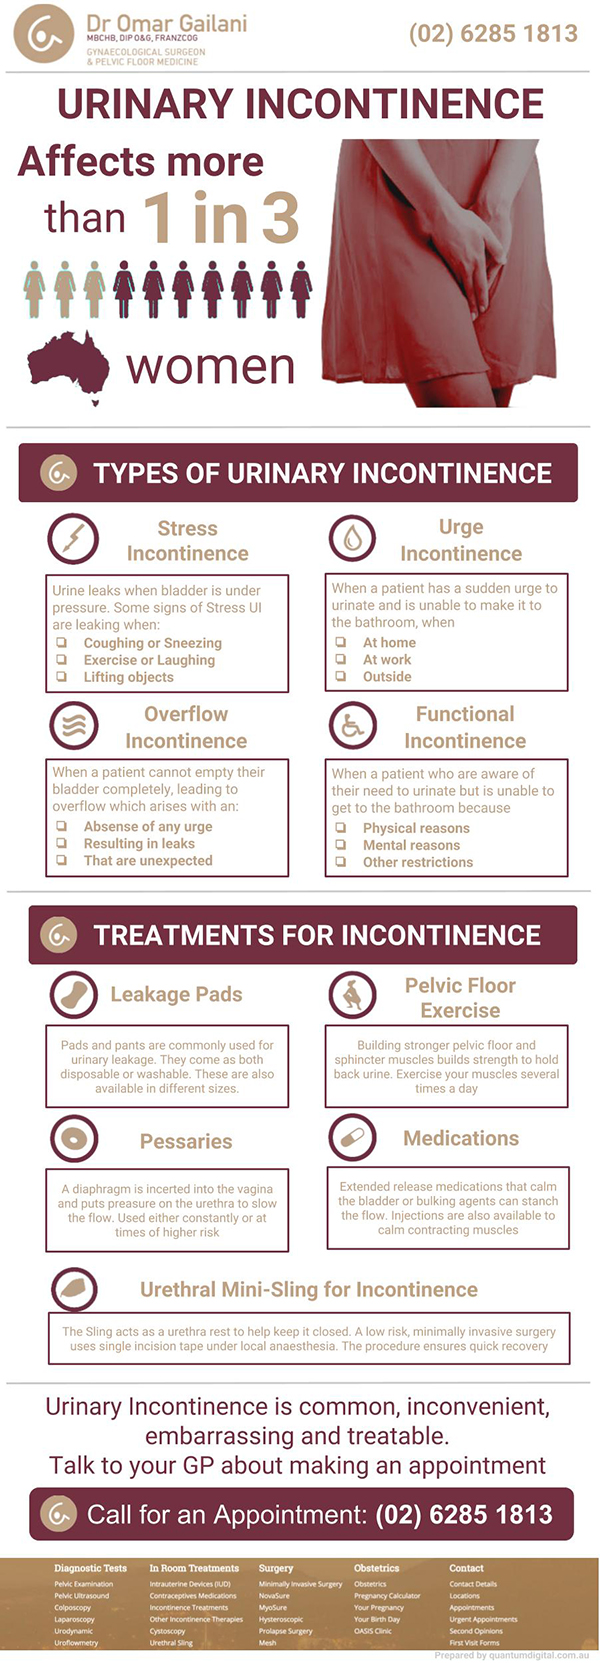 Urinary Incontinence Affects 1 in 3 Women